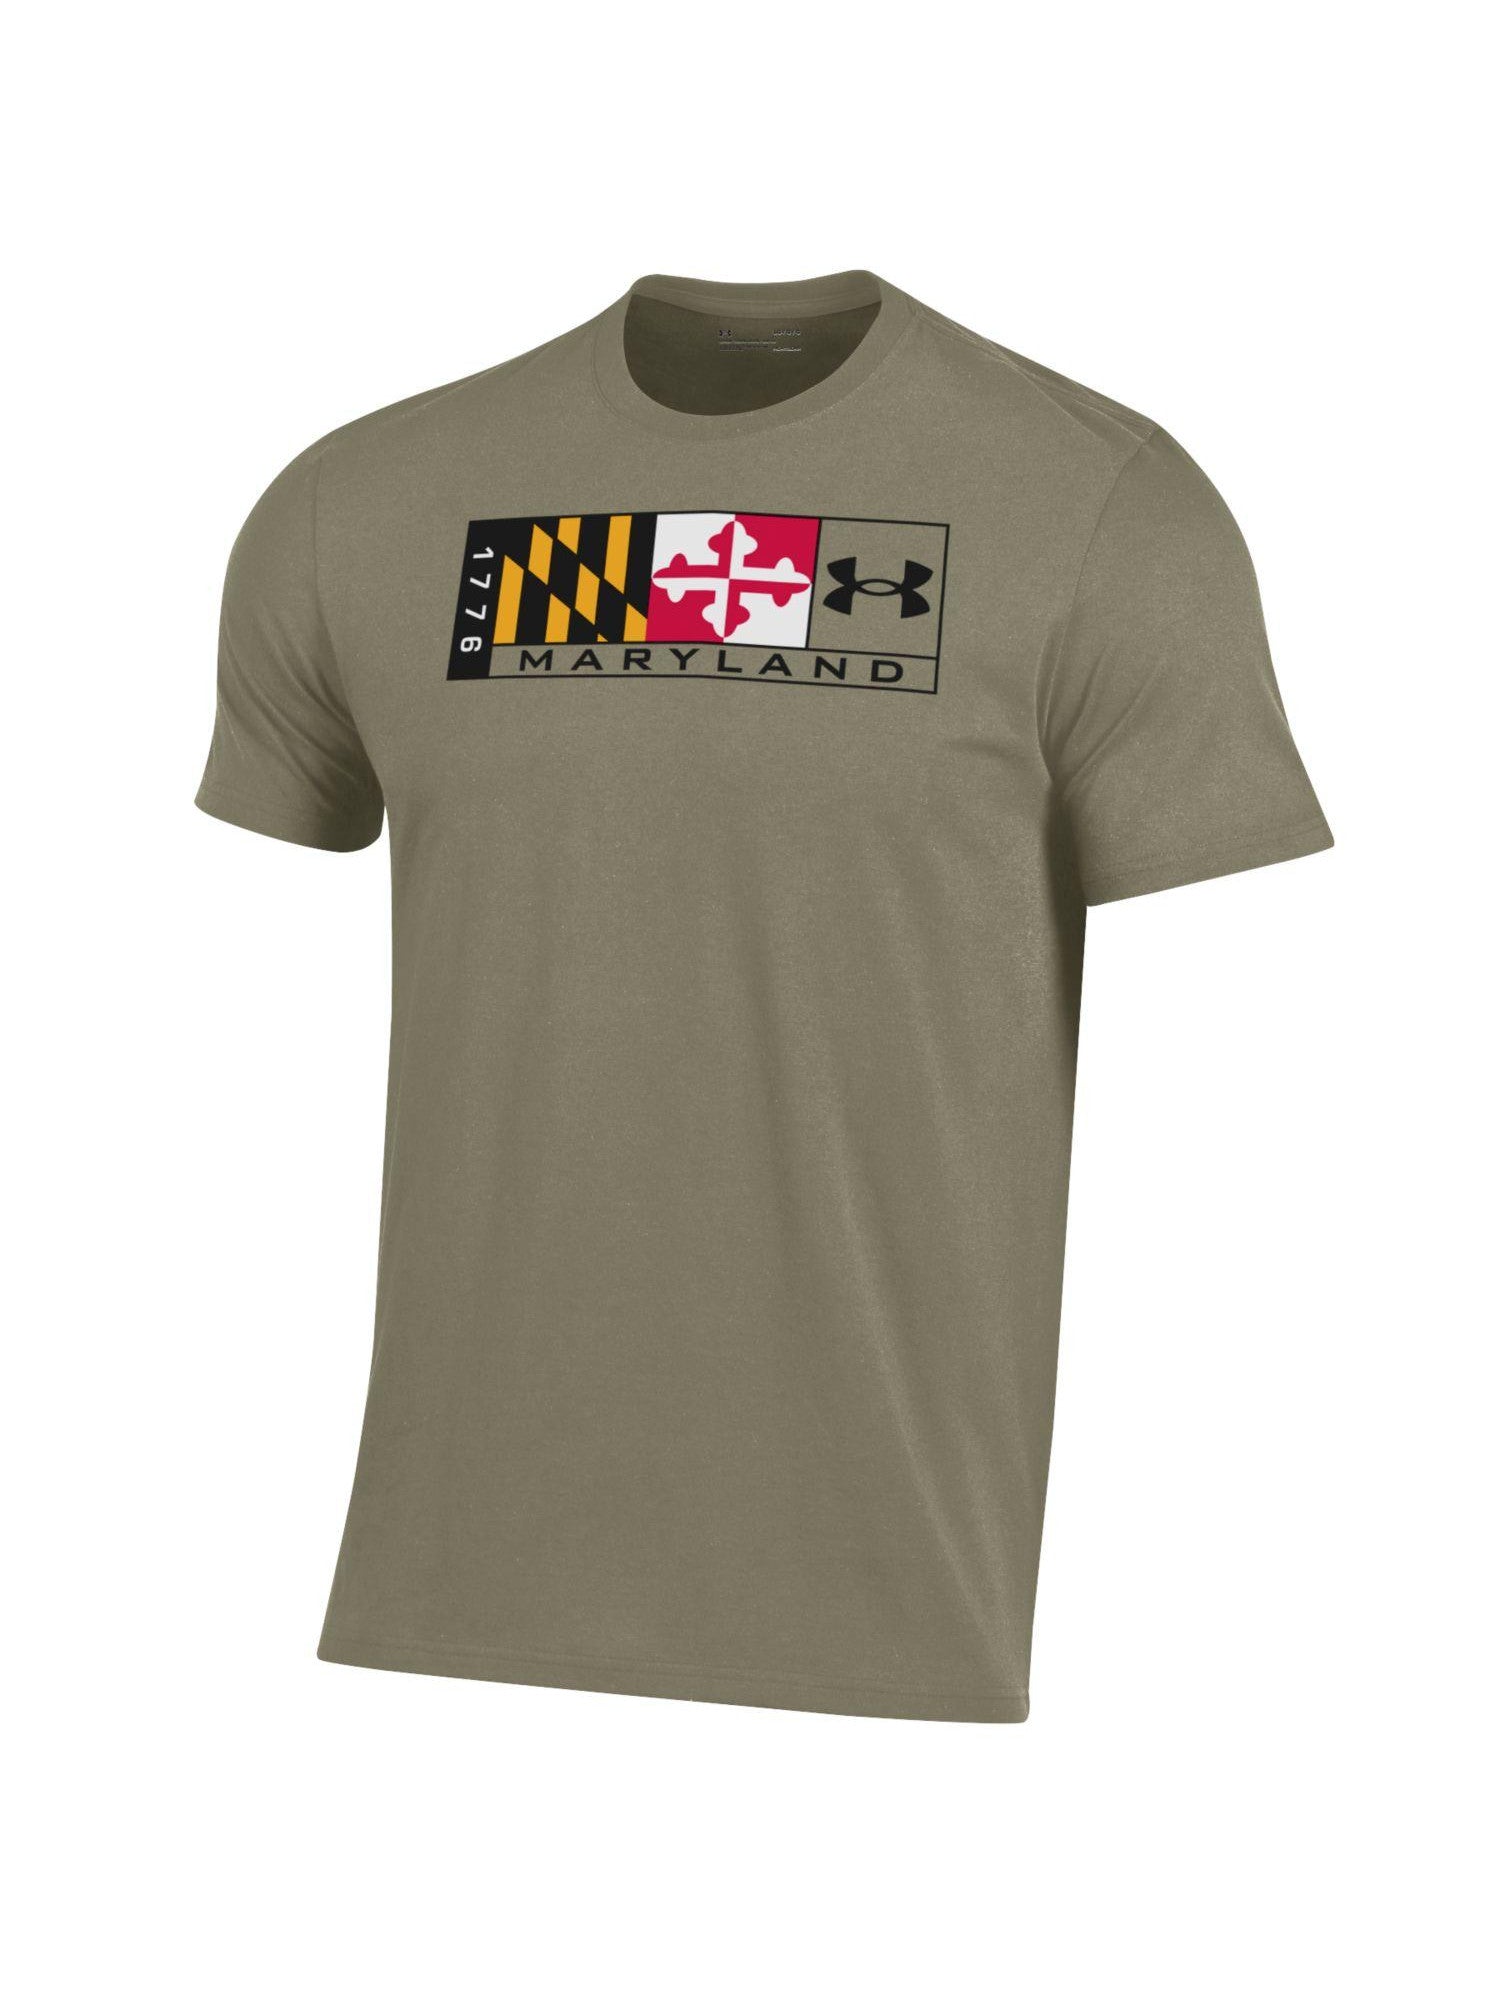 under-armour-maryland-1776-t-shirt-olive-drab